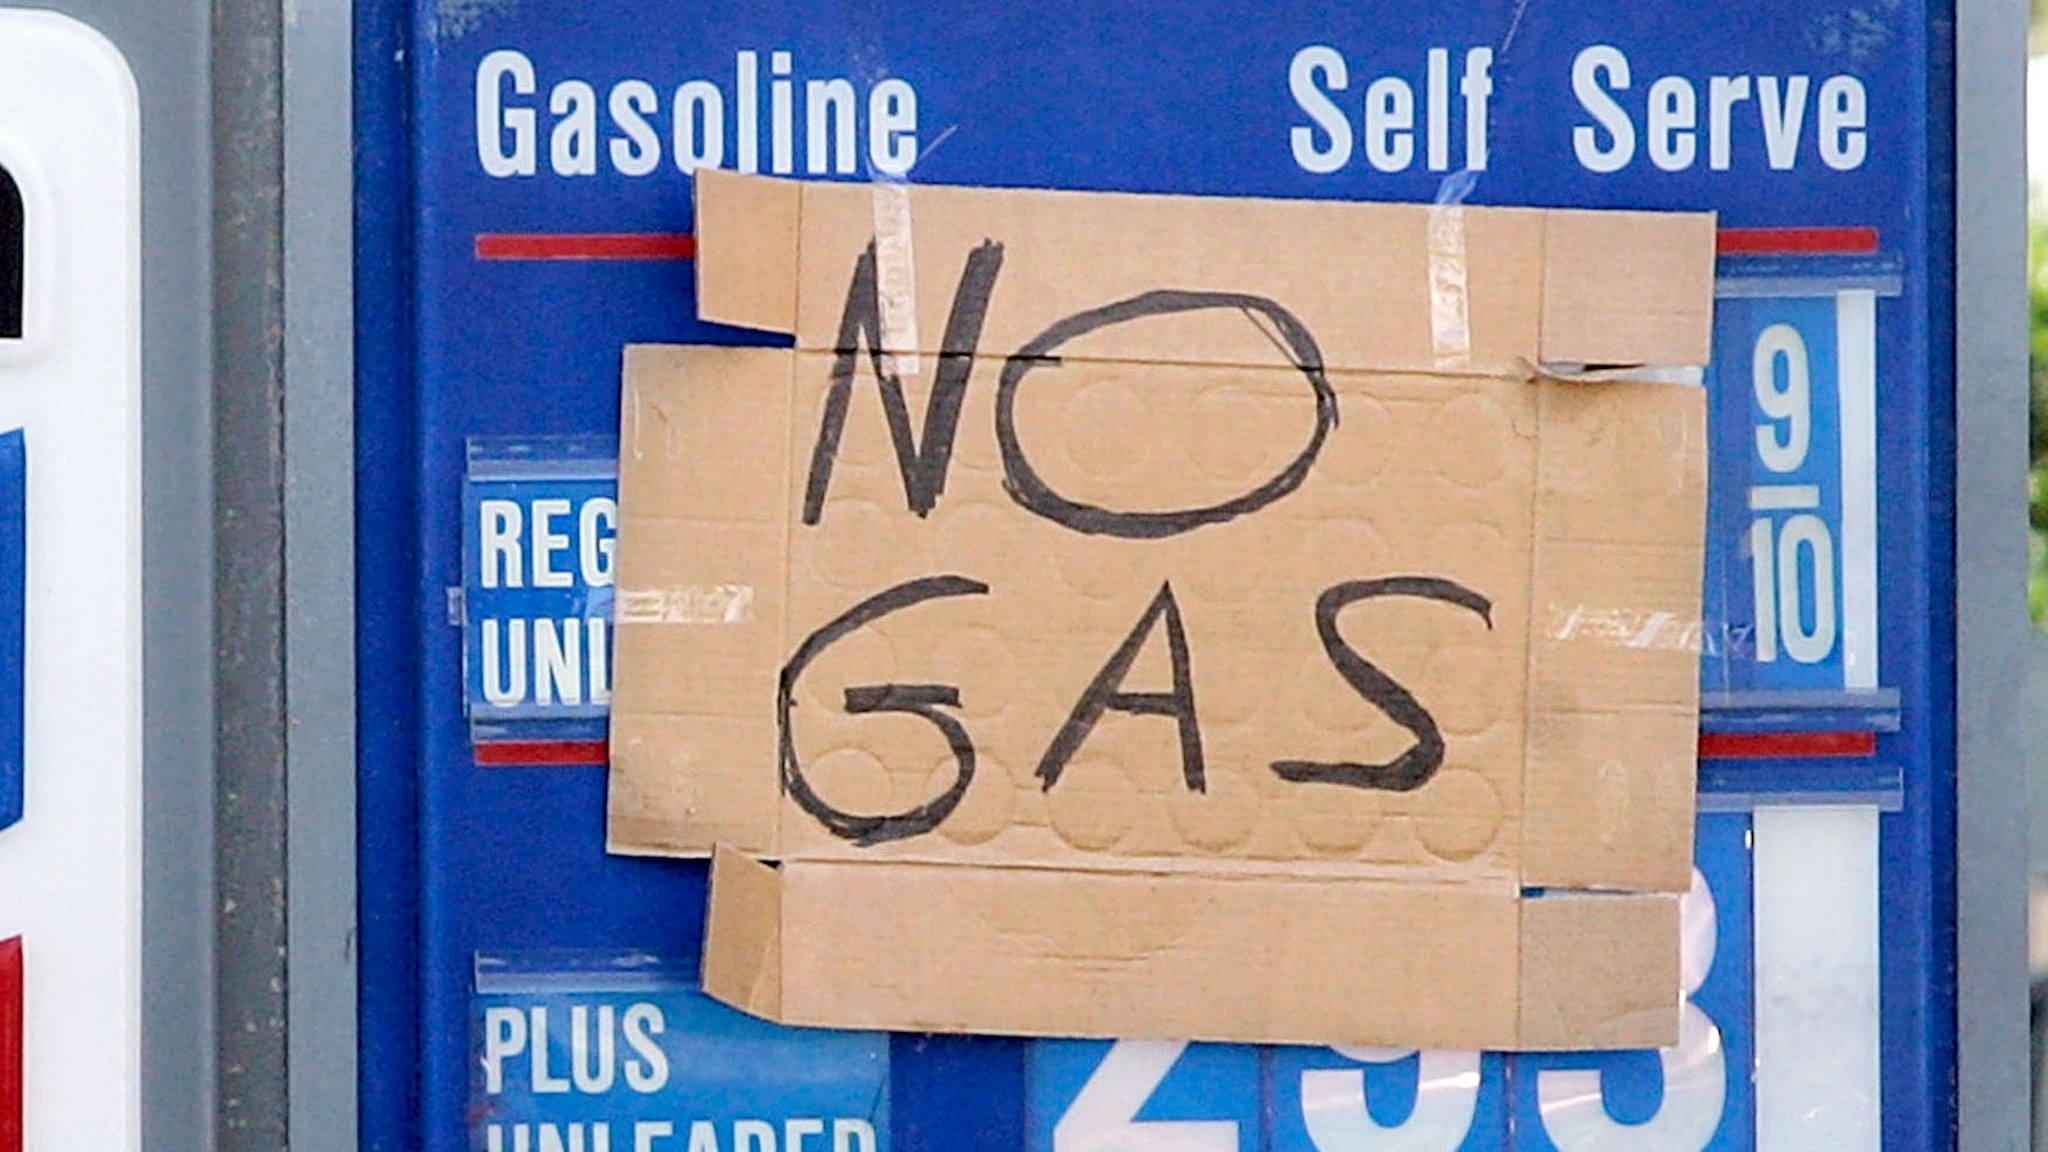 FT. LAUDERDALE - OCTOBER 27: A sign that reads," No Gas" hangs on a Chevron gas station in South Florida that had no power to pump gas October 27, 2005 in Ft. Lauderdale, Florida. Hurricane Wilma tore through the area leaving millions without power while doing billions of dollars worth of damage.